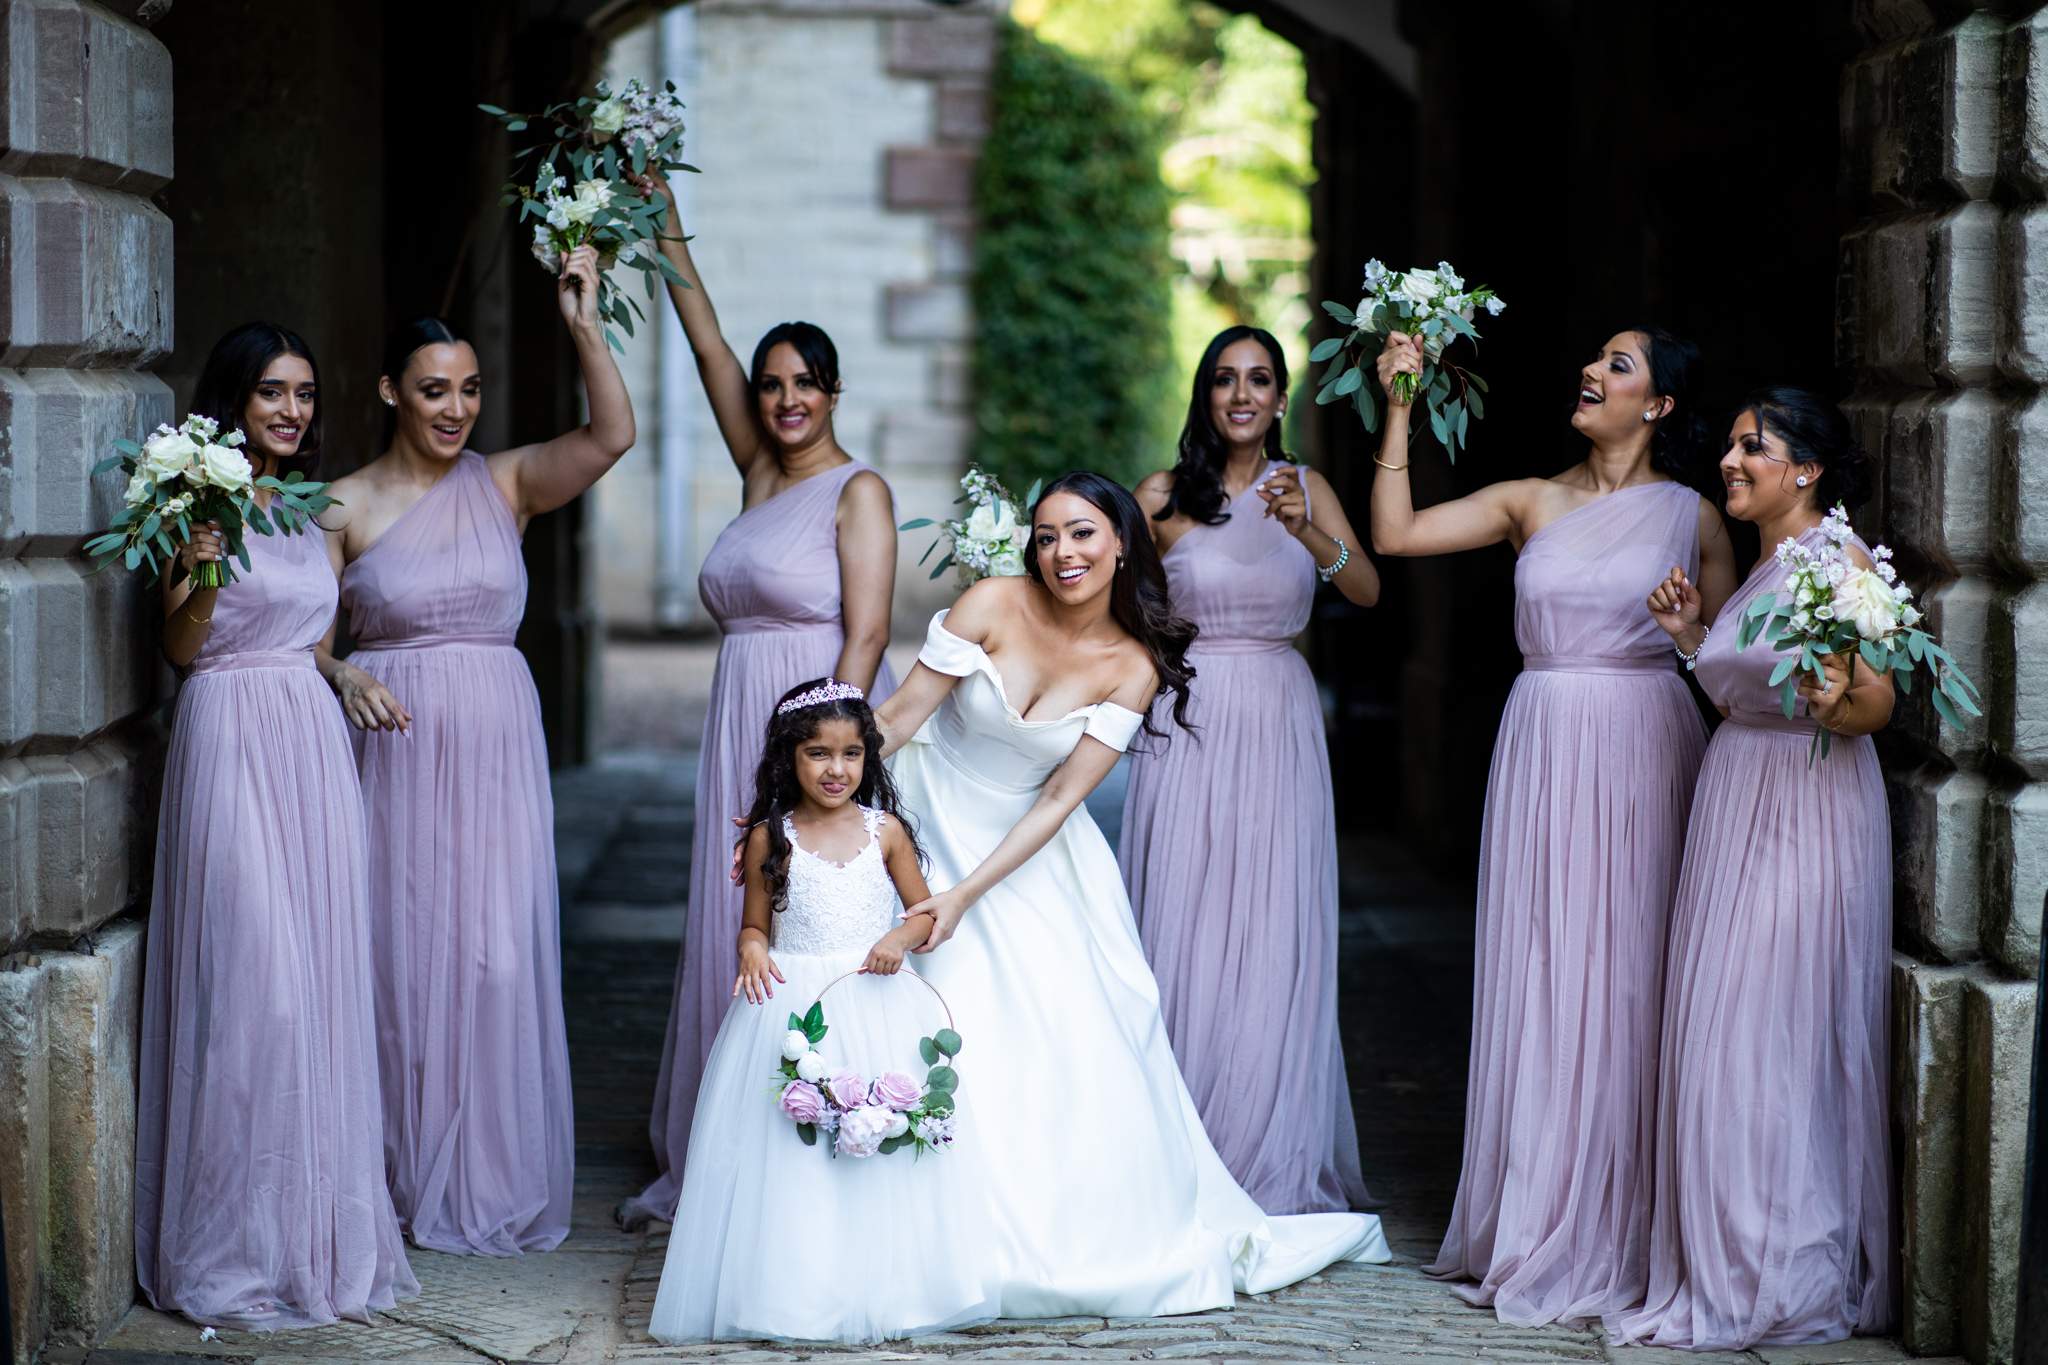 Bride smiling with her bridesmaids standing around her holding up their flowers high in the air.